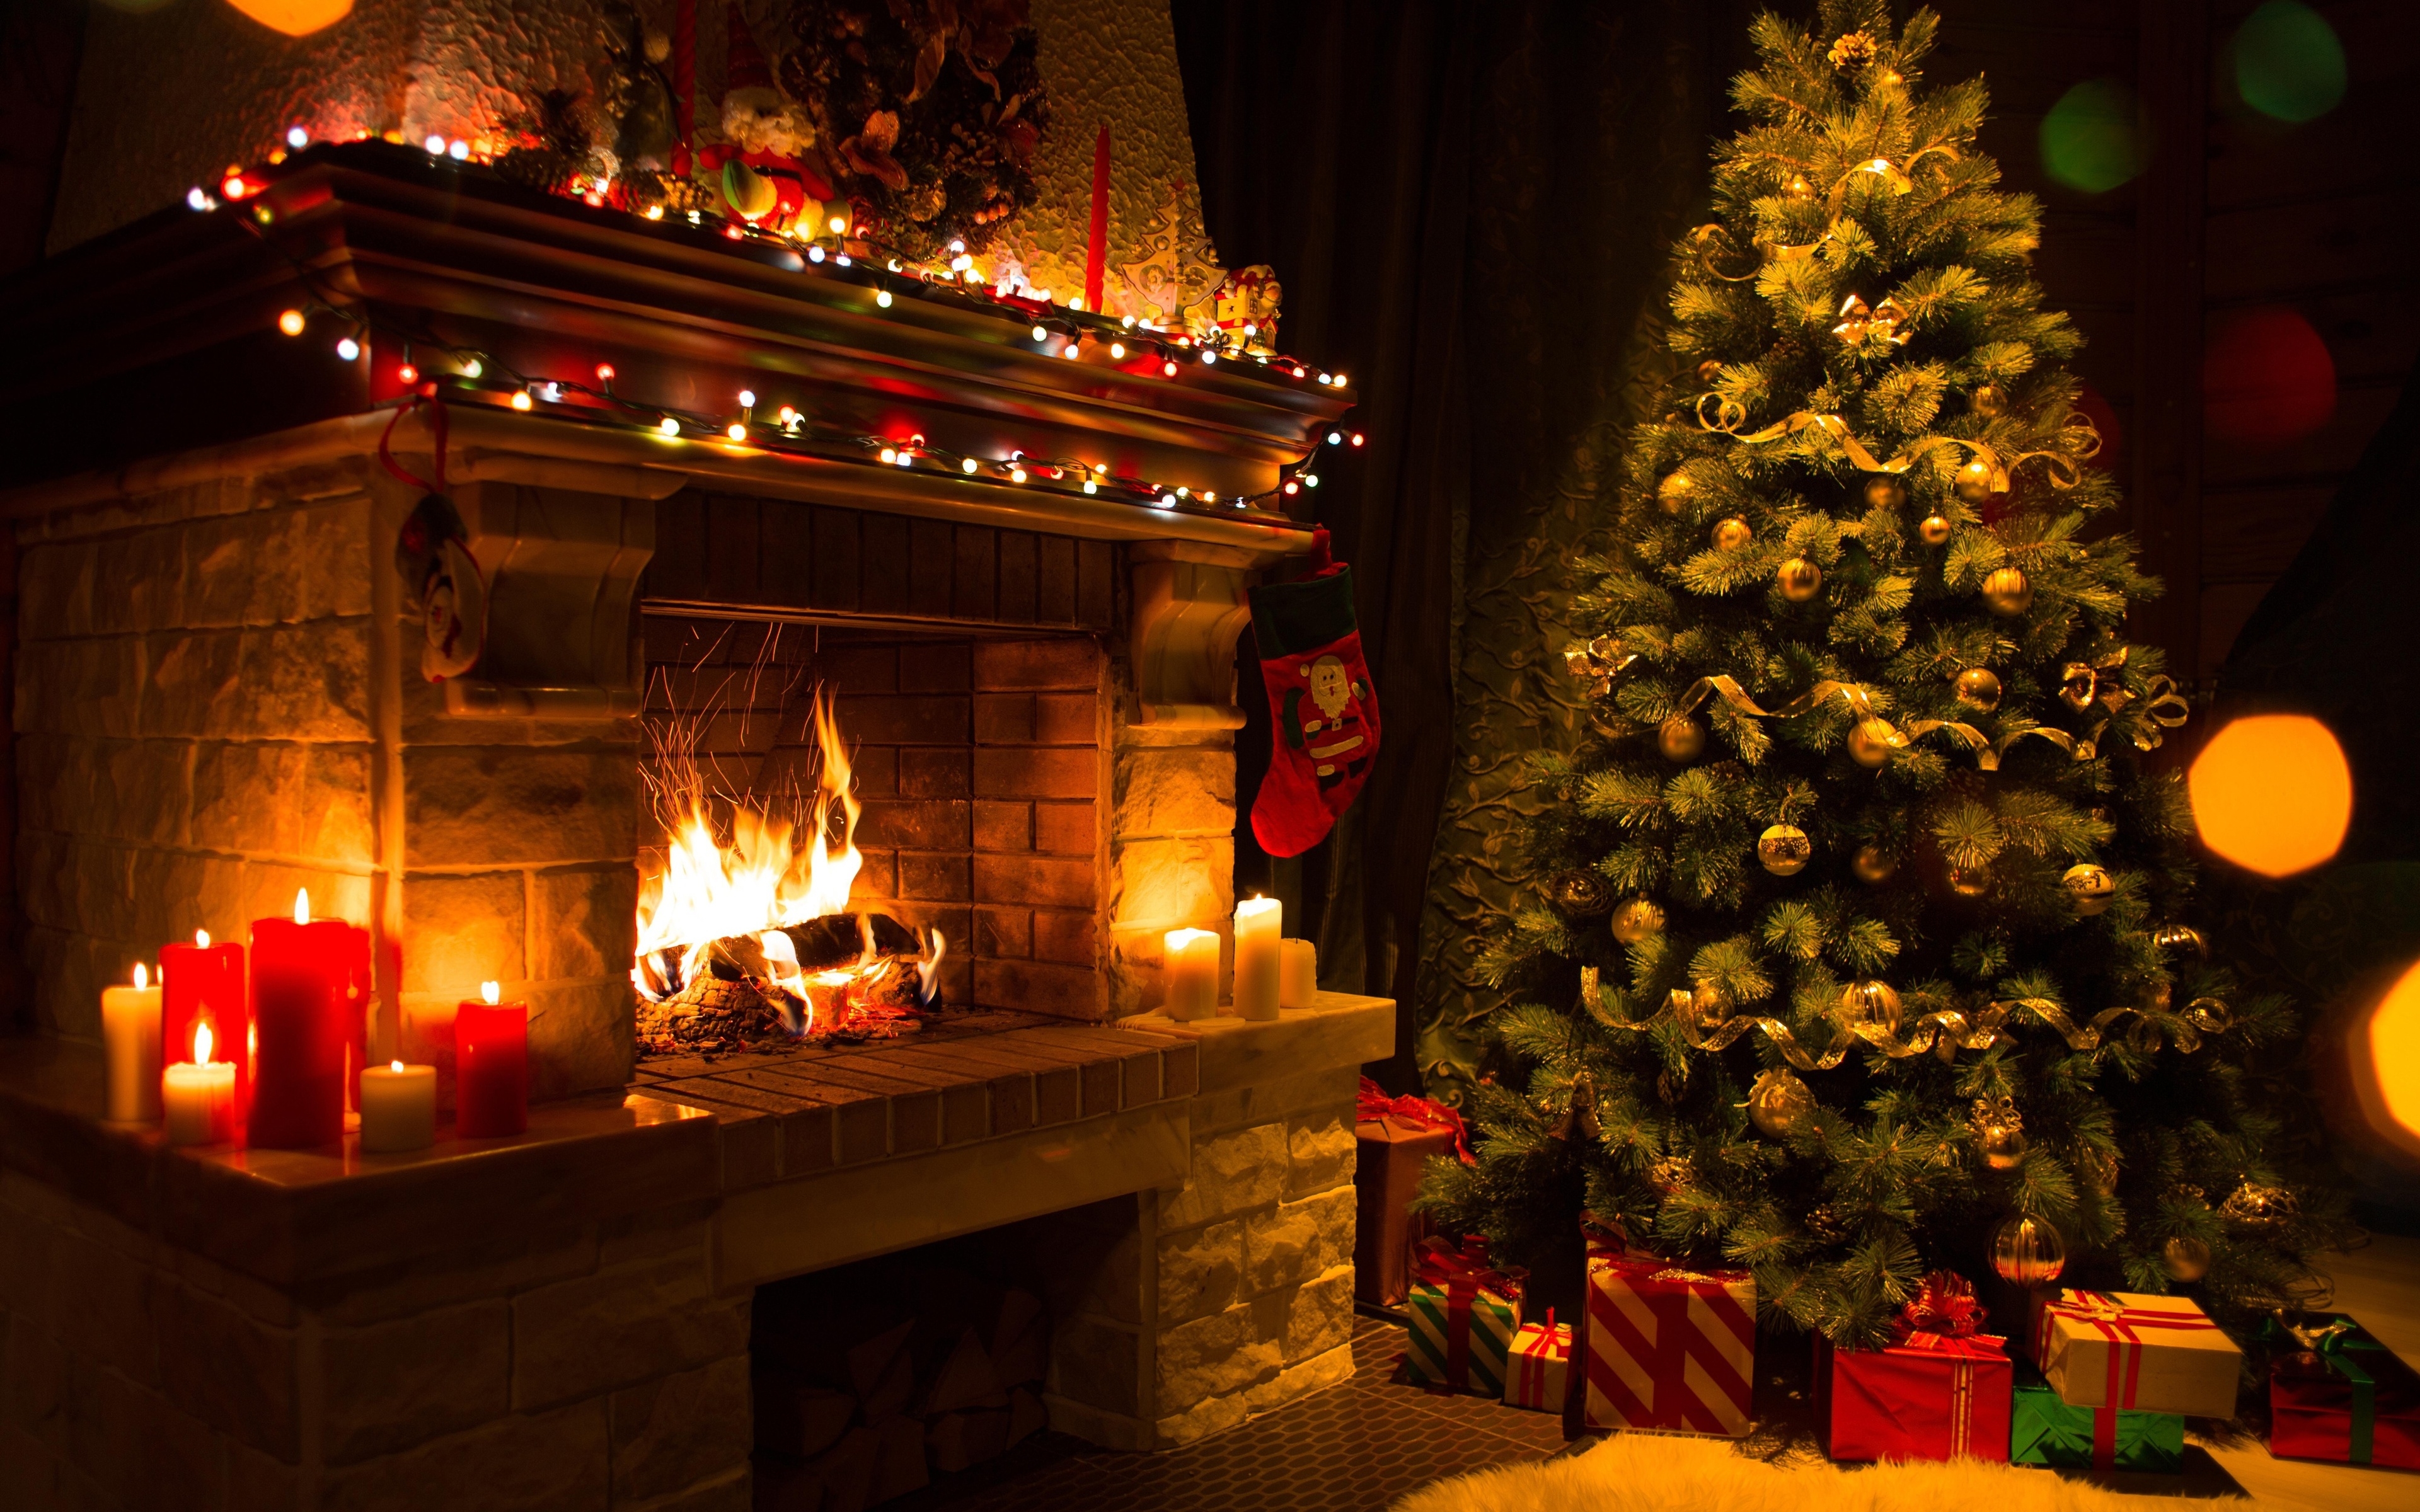 Christmas Home Decorations for 3840 x 2400 Widescreen resolution